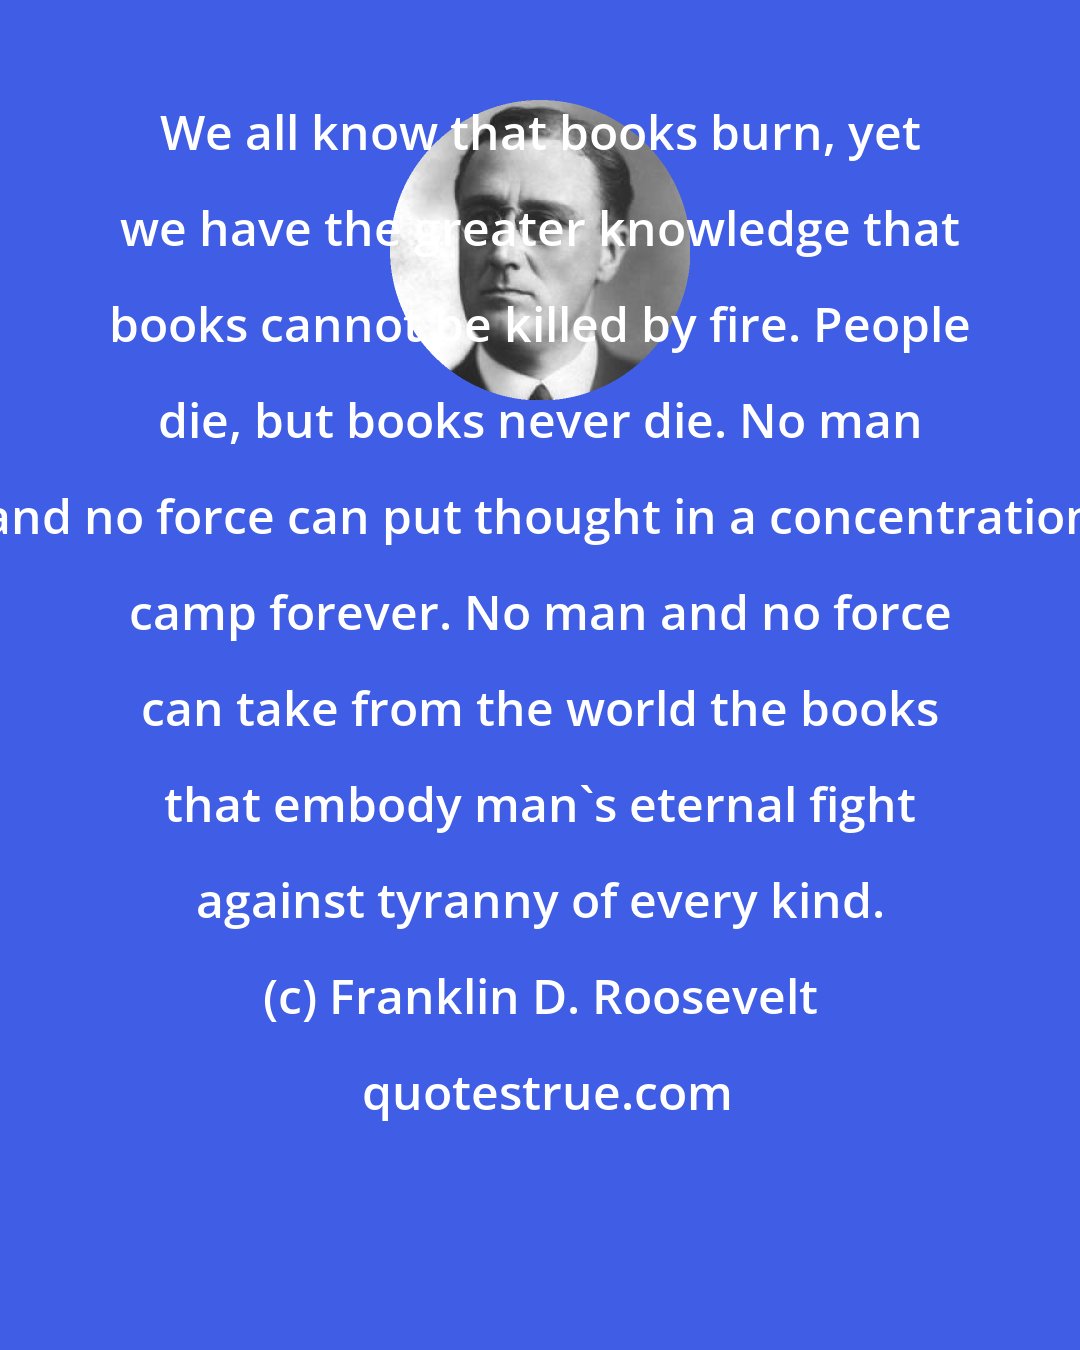 Franklin D. Roosevelt: We all know that books burn, yet we have the greater knowledge that books cannot be killed by fire. People die, but books never die. No man and no force can put thought in a concentration camp forever. No man and no force can take from the world the books that embody man's eternal fight against tyranny of every kind.